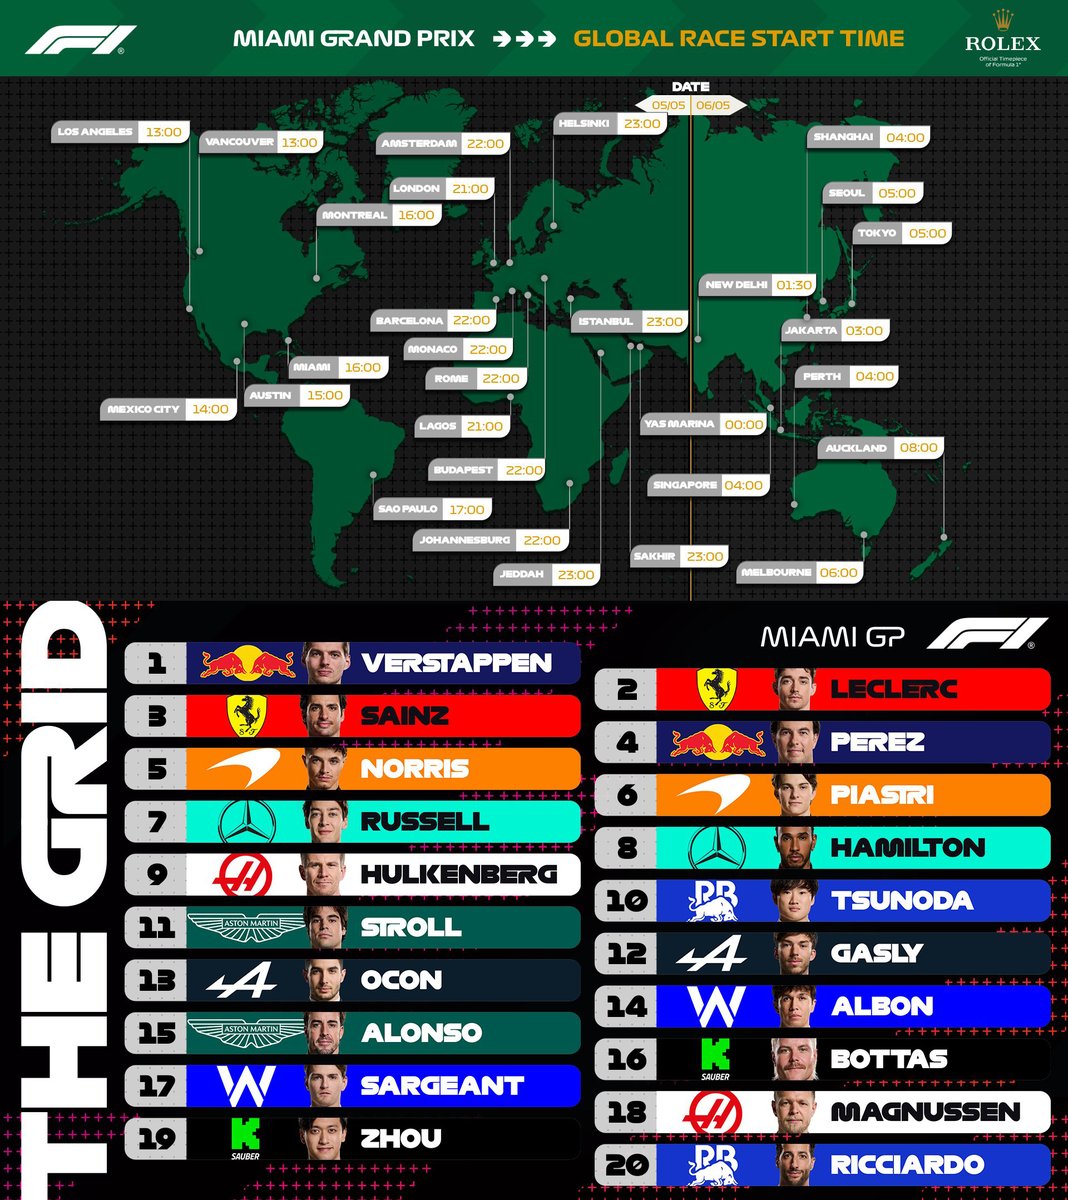 Here's confirmation of the start times - wherever you may be in the world - for the 2024 Miami Grand Prix, plus the starting grid.
#F1 #MiamiGP @f1miami #Miami #Fit4F1 @Pirelli @pirellisport @Pirelli__ME 🇺🇸🏁